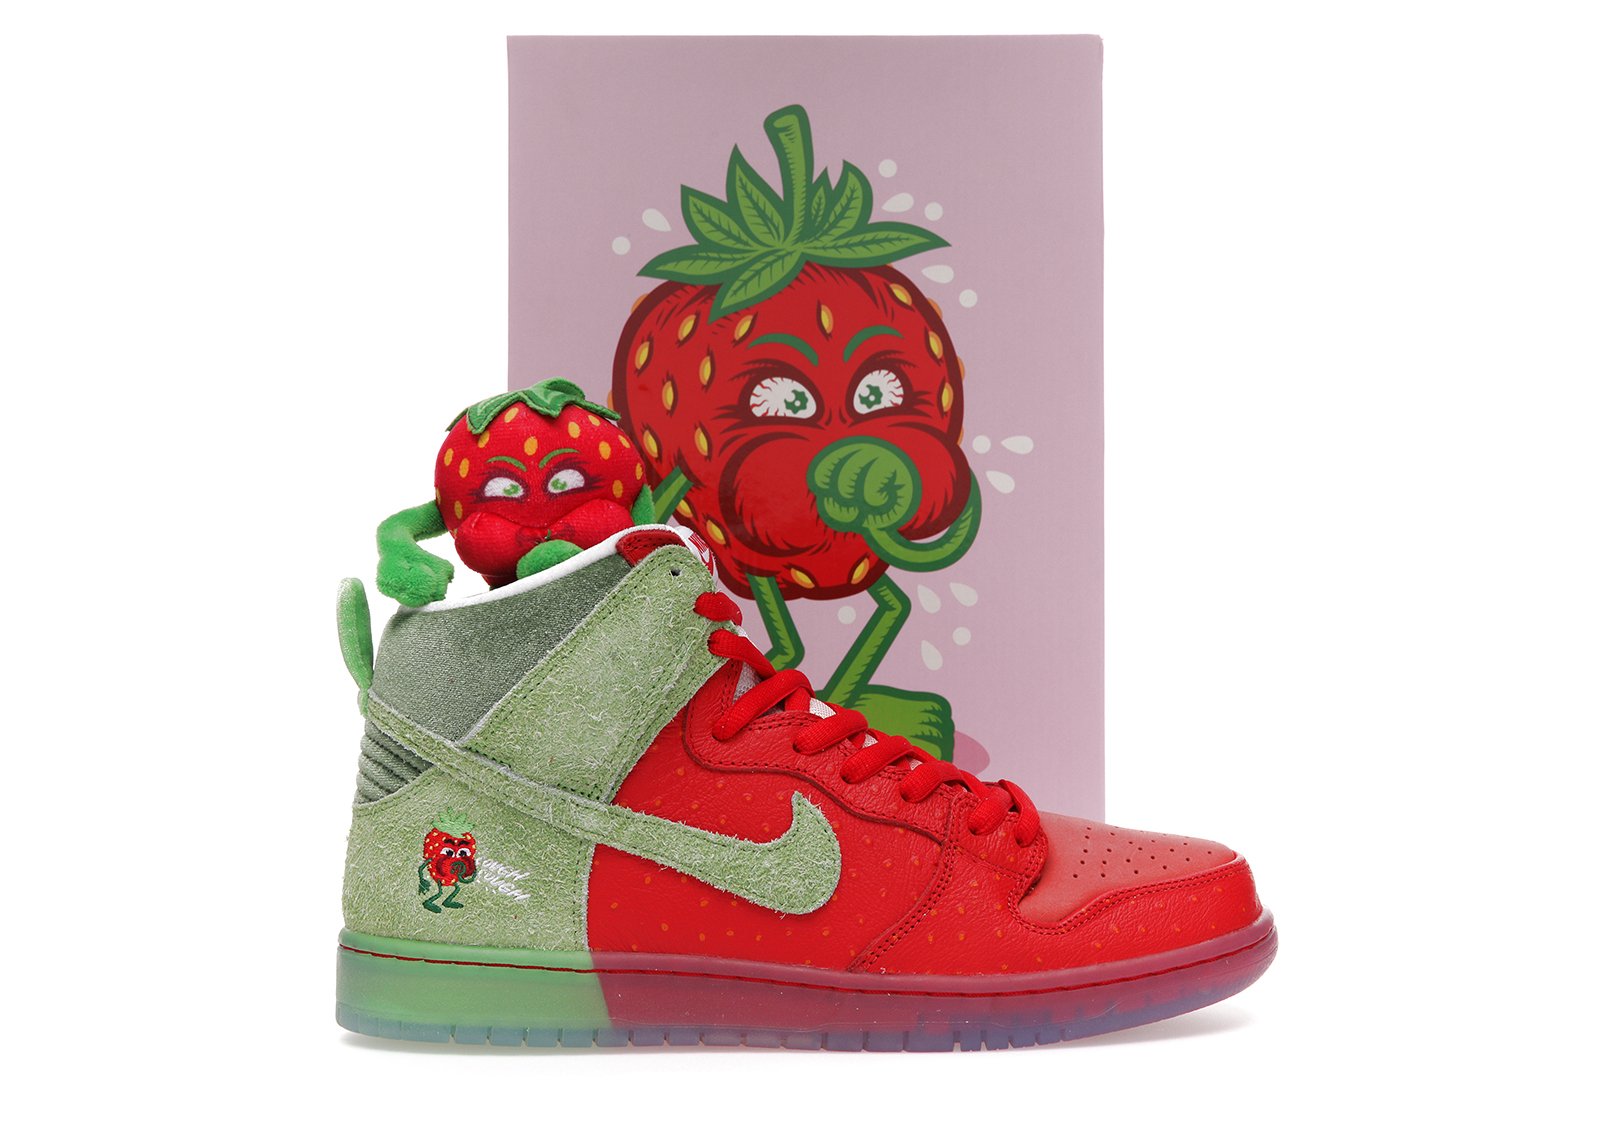 Nike SB Dunk High Strawberry Cough (Special Box) sneakers